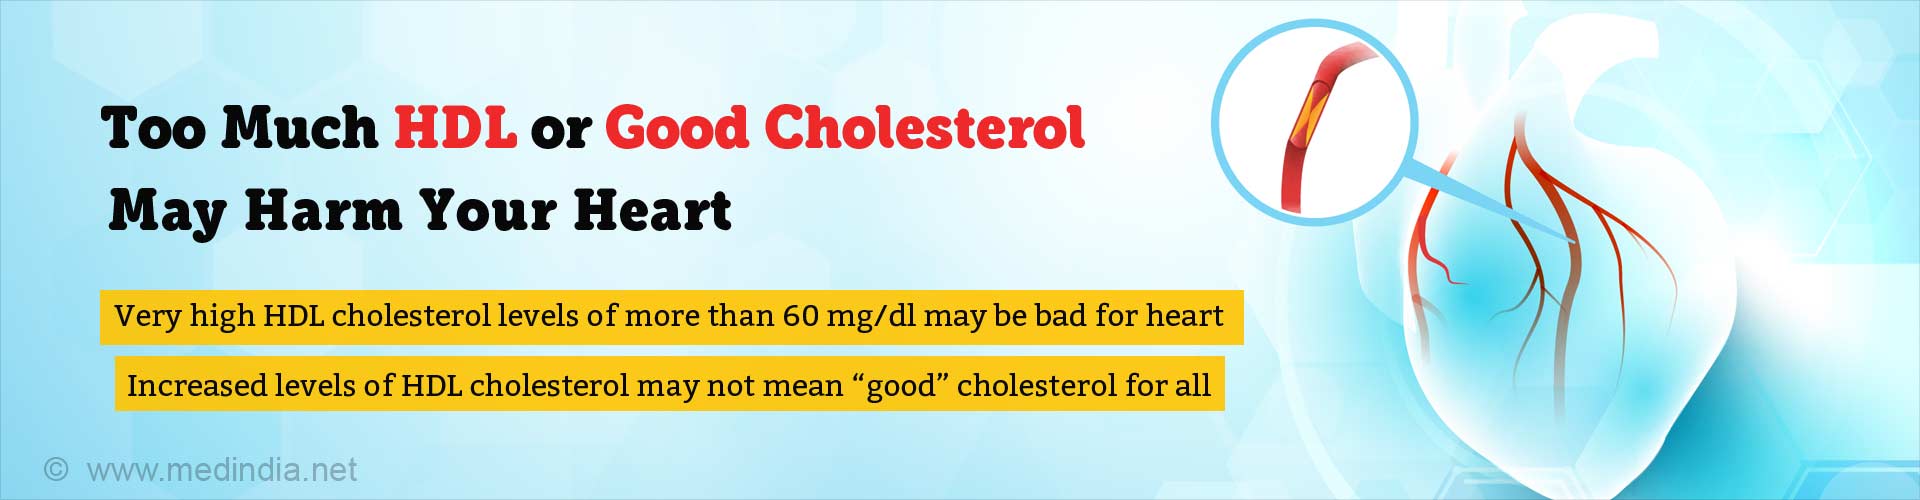 Too much HDL or good cholesterol may harm your heart. Very high HDL cholesterol levels of more than 60mg/dl may be bad for heart. Increased levels of HDL cholesterol may not mean 'good' cholesterol for all.